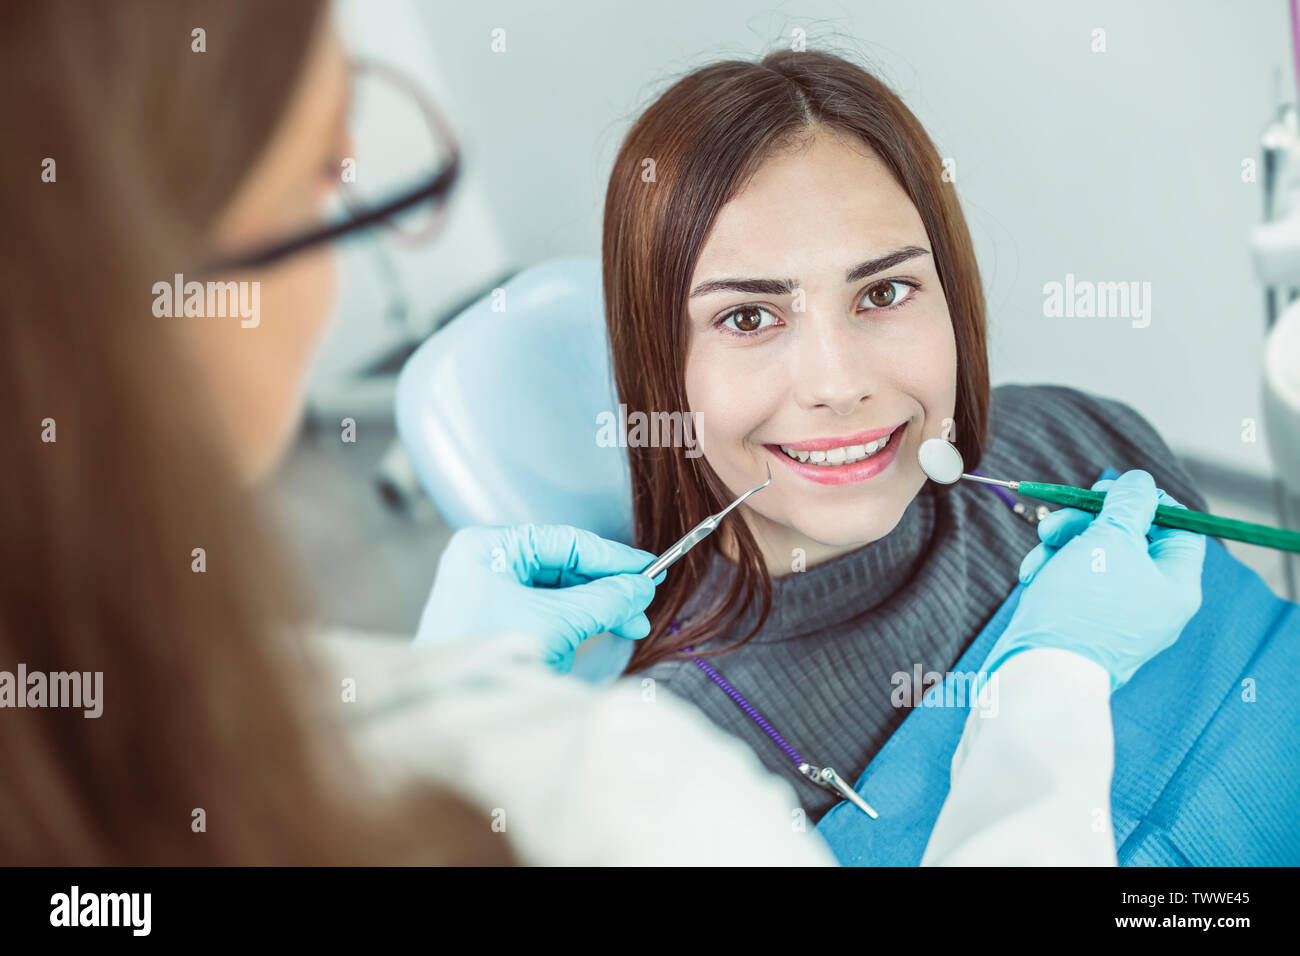 Smiling girl treats teeth while sitting in the dental chair at the doctor. Stock Photo